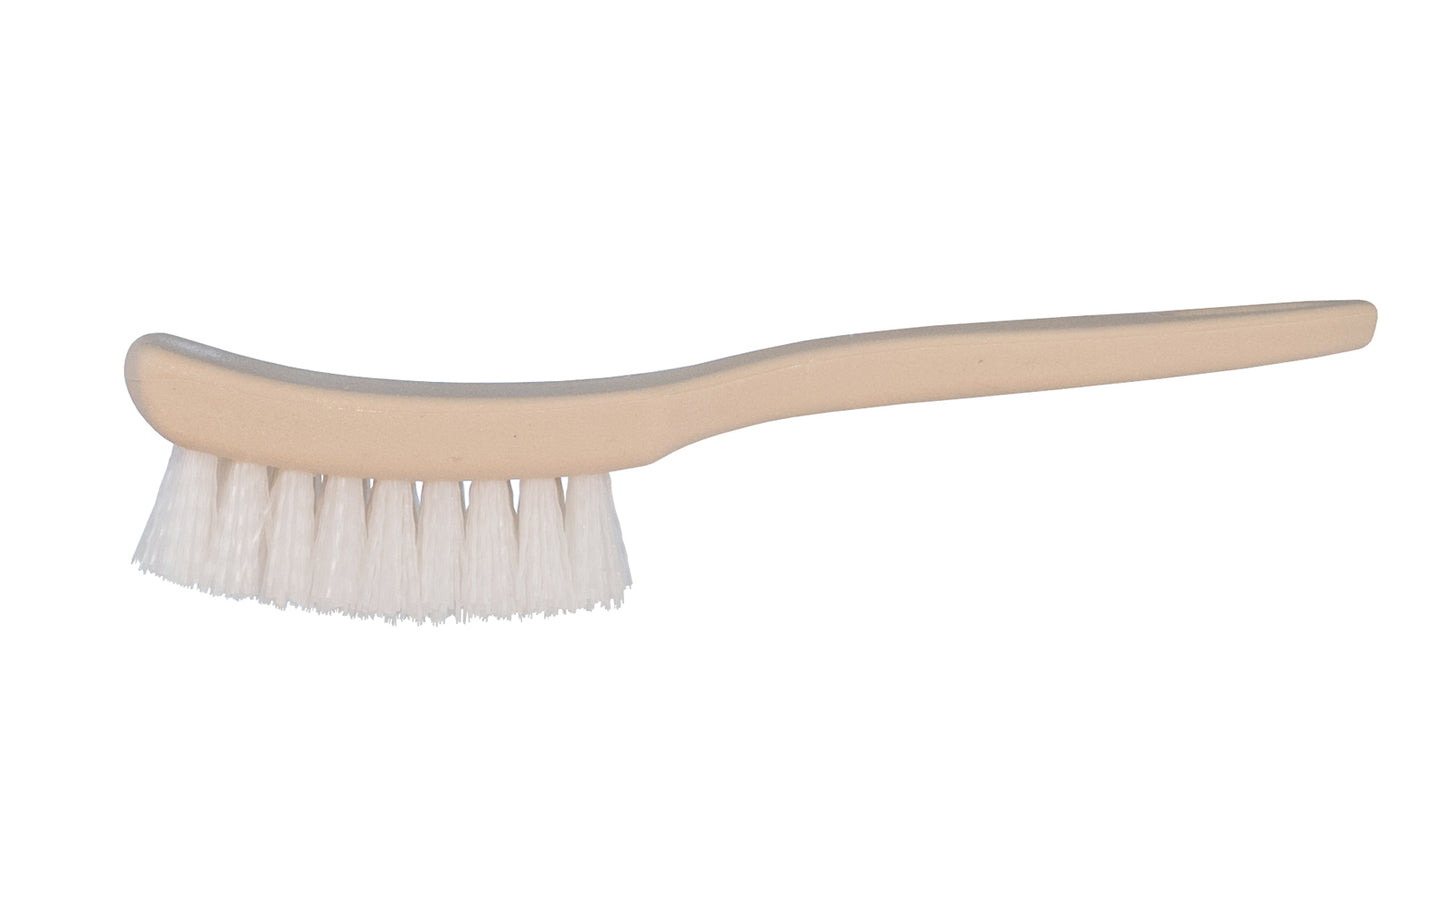 7-1/4" Long Nylon Cleaning Brush with Polypropylene Handle ~ 1-1/4" Width x 13/16" Trim - Magnolia Brush Model No. 66-N - Made in USA